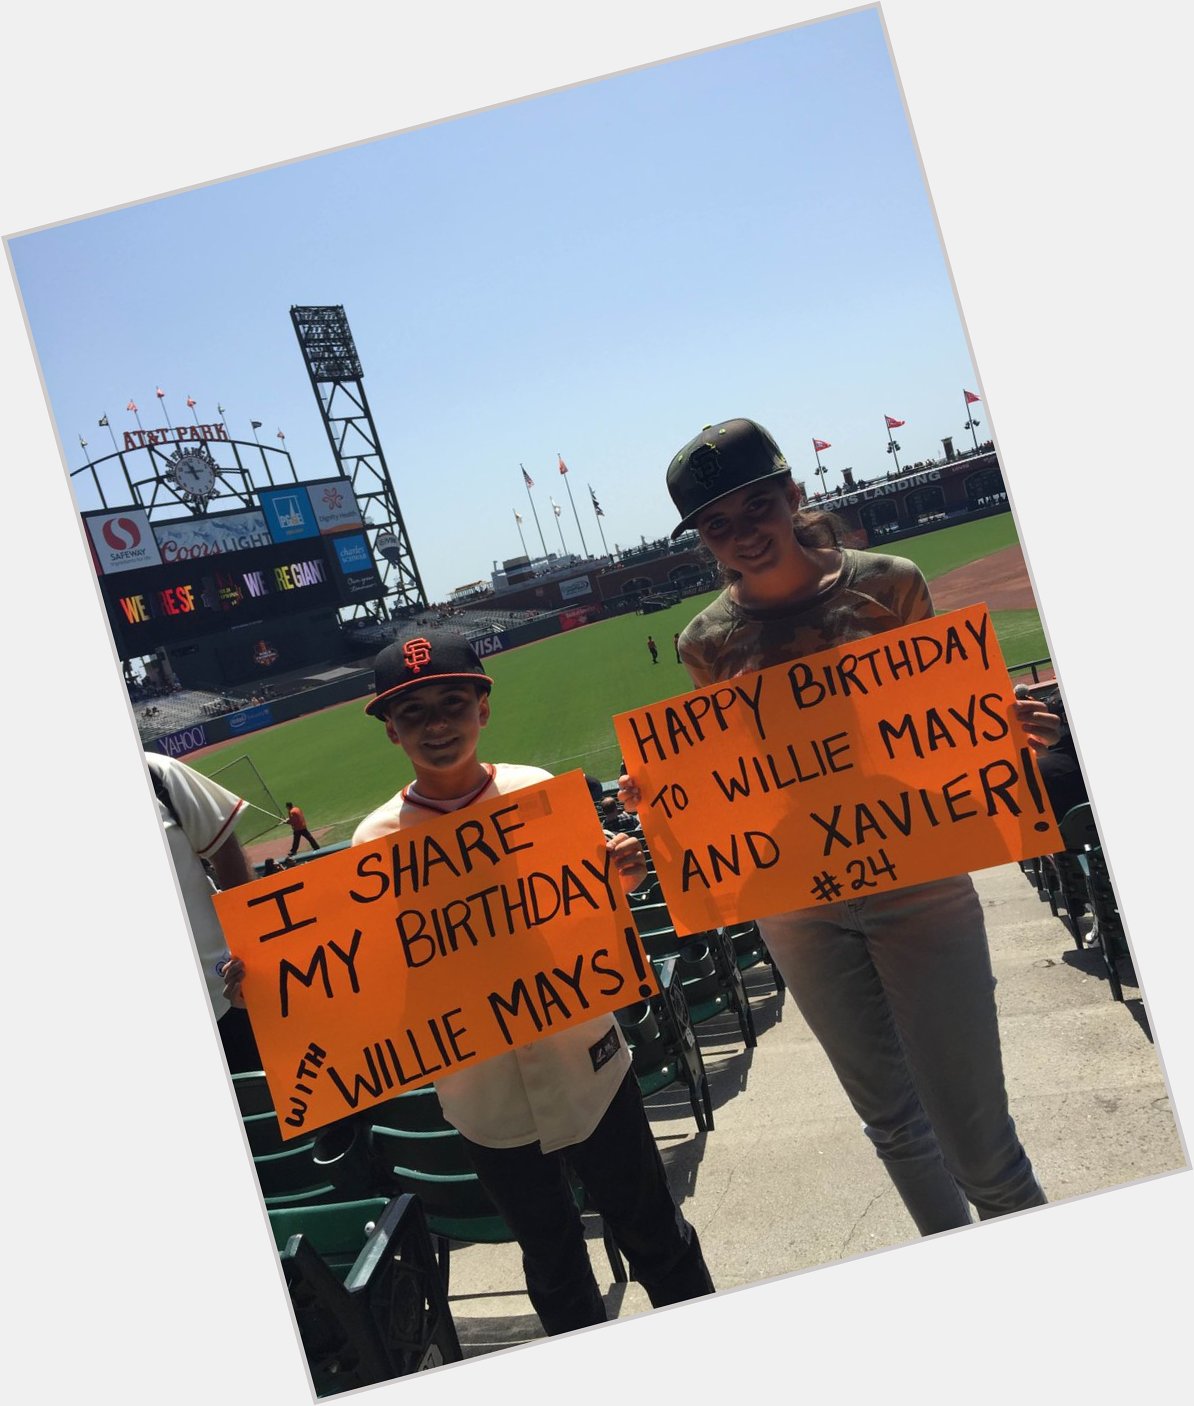 Willie Mays has fans of all ages.  Happy Birthday 